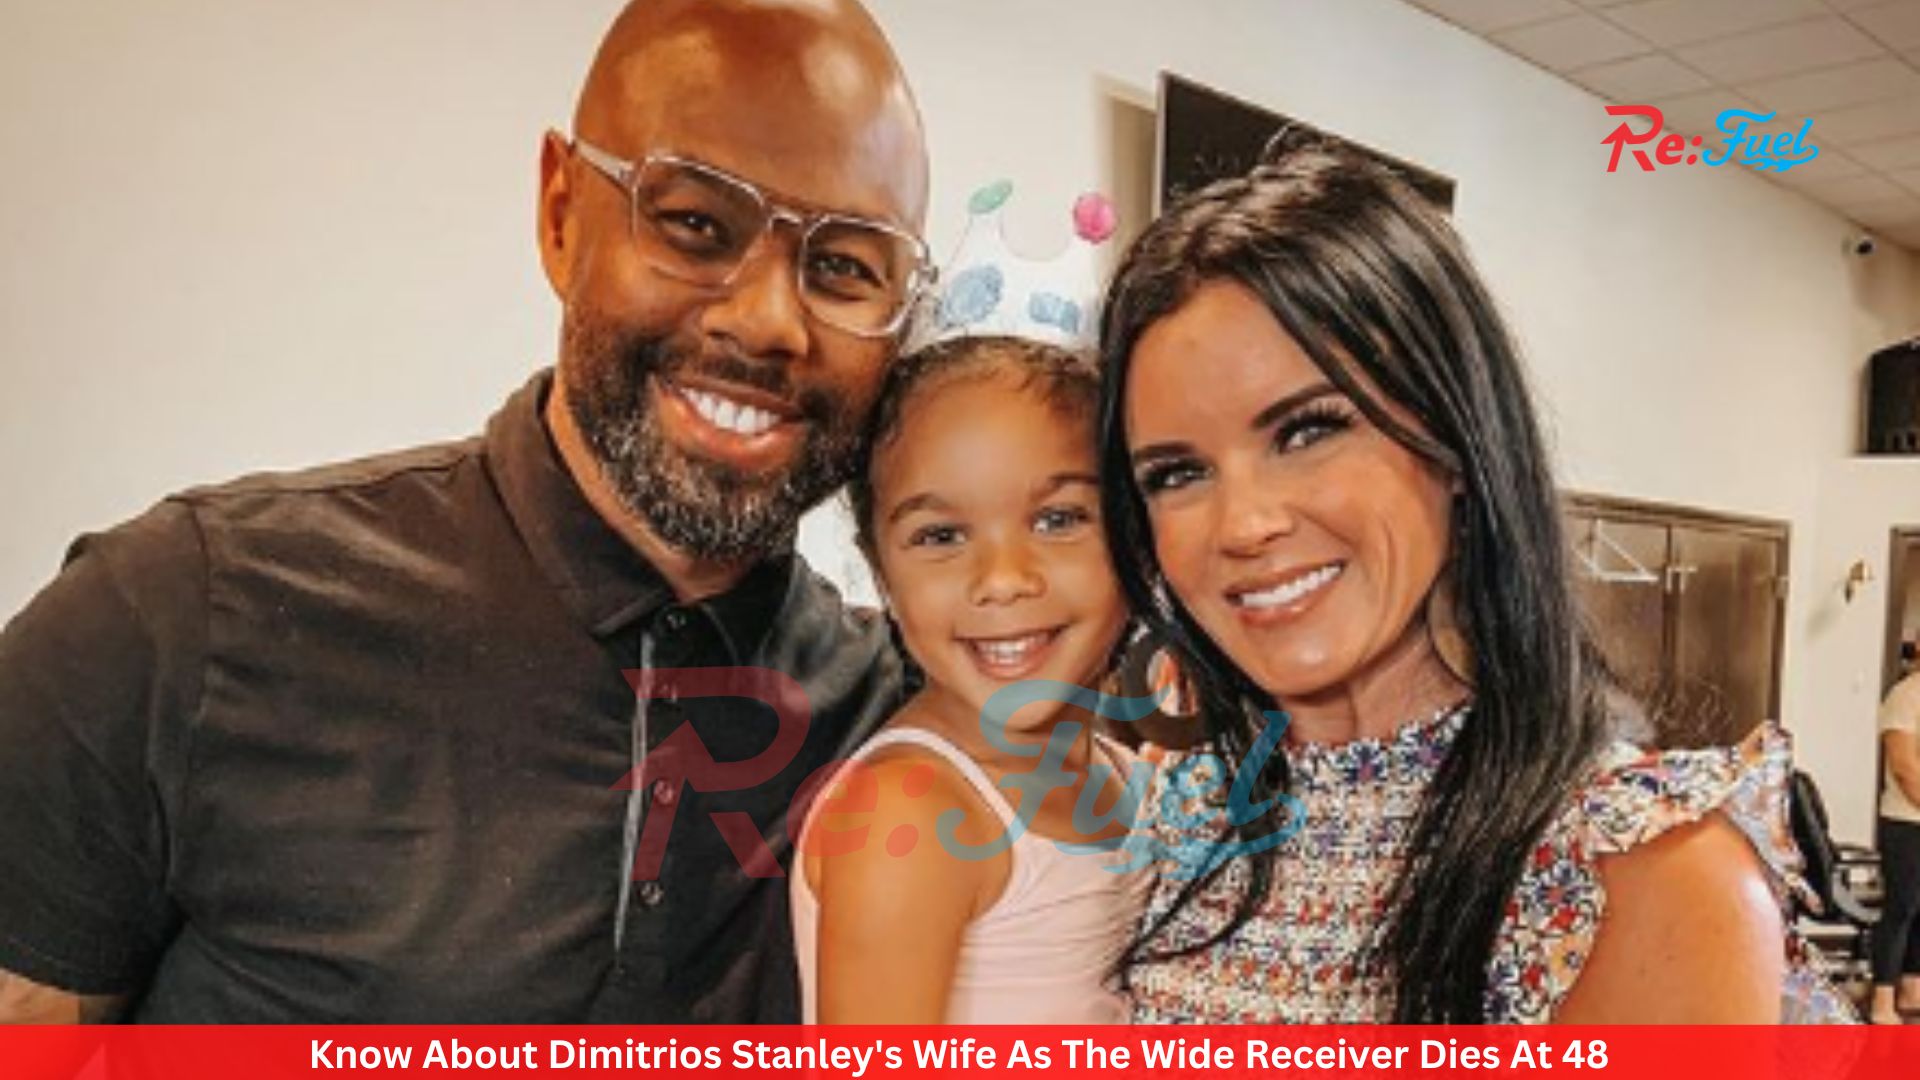 Know About Dimitrios Stanley's Wife As The Wide Receiver Dies At 48